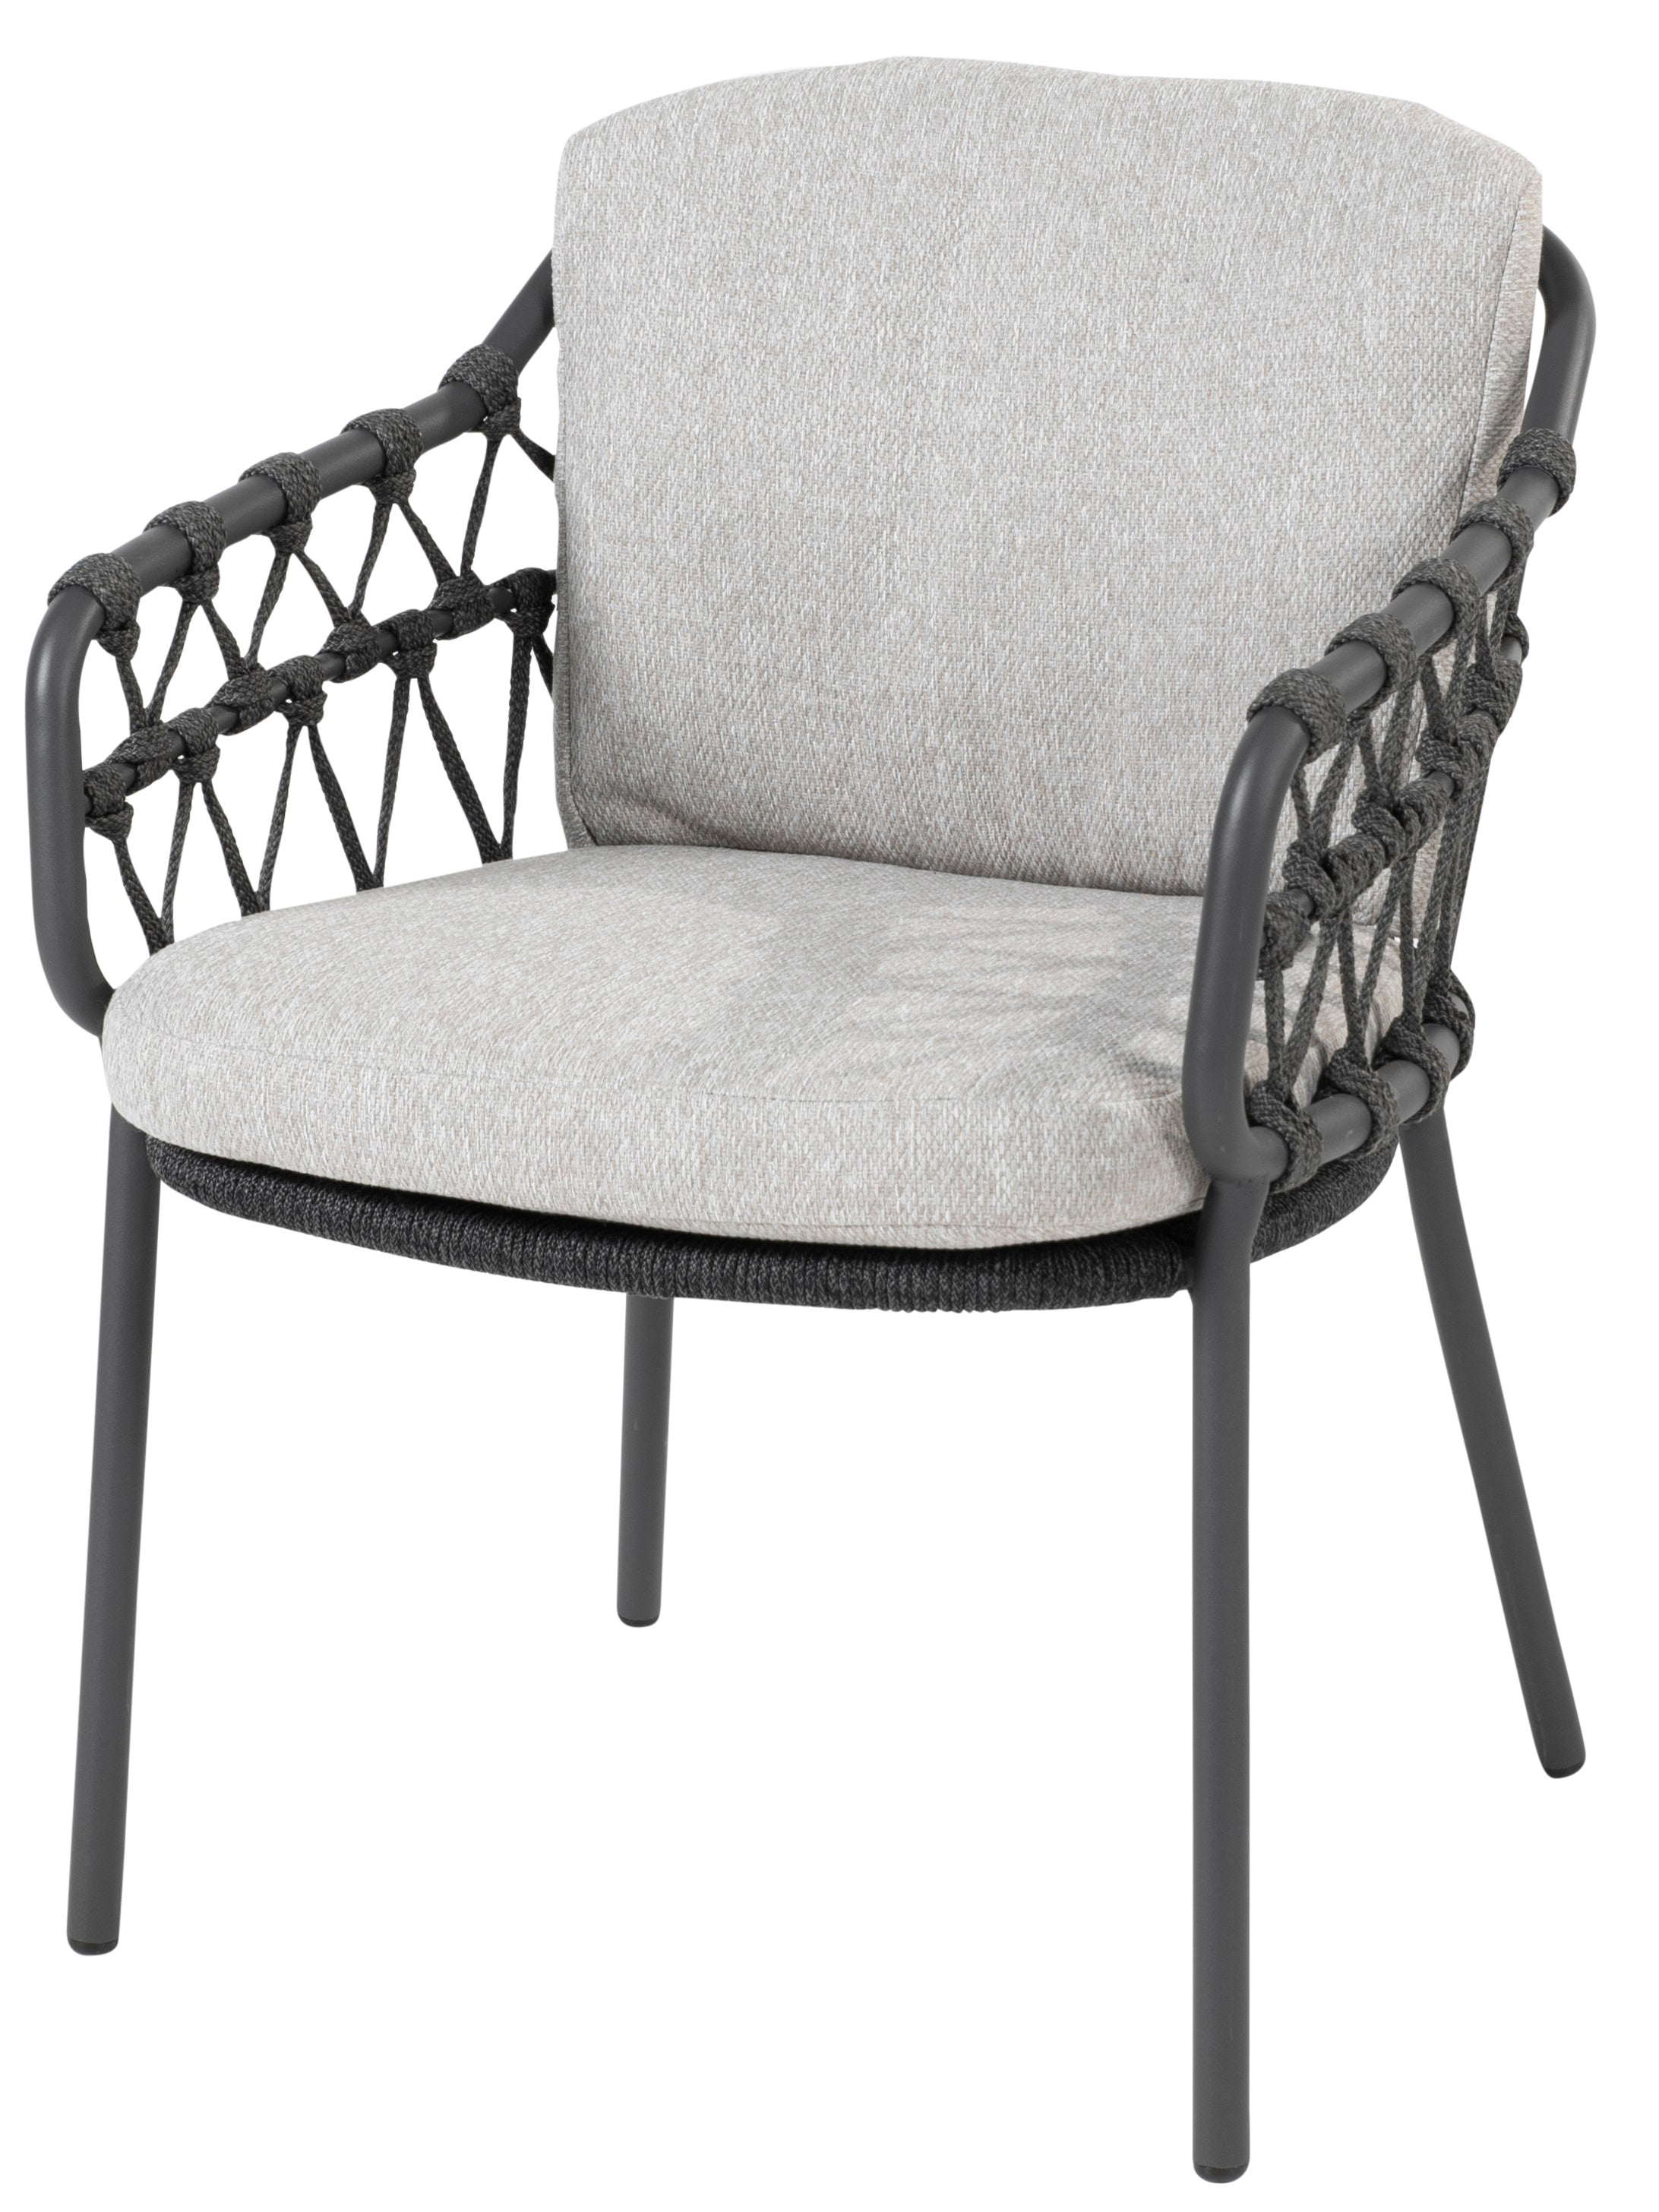 4 Seasons Outdoor Calpi Dining Chair Anthracite With 2 Cushions (Packed In 2's)